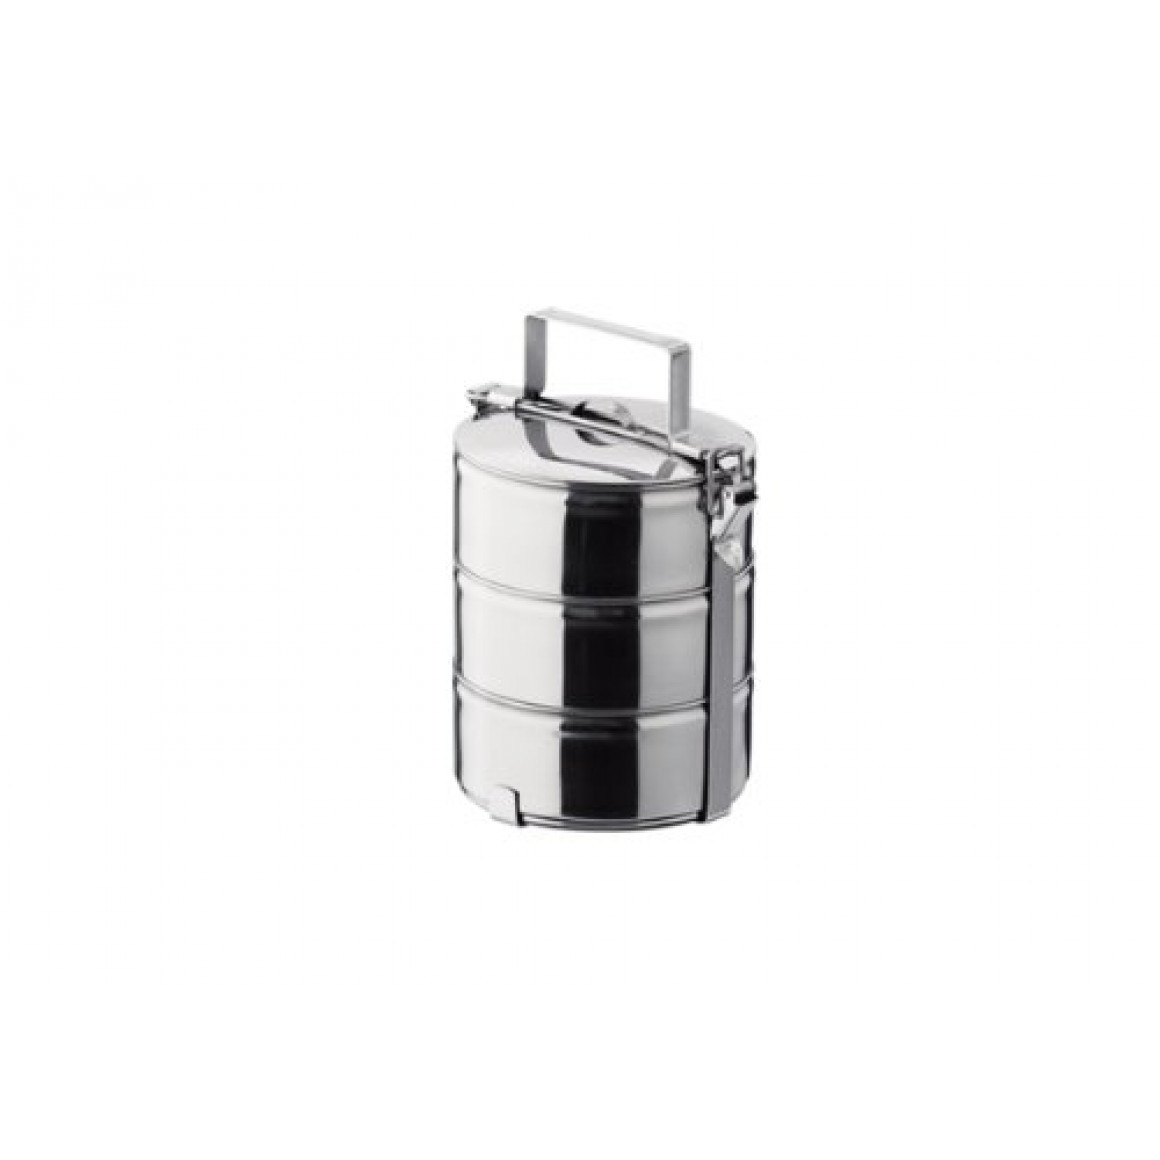 STAINLESS STEEL LUNCH BOX - 3 PLACES